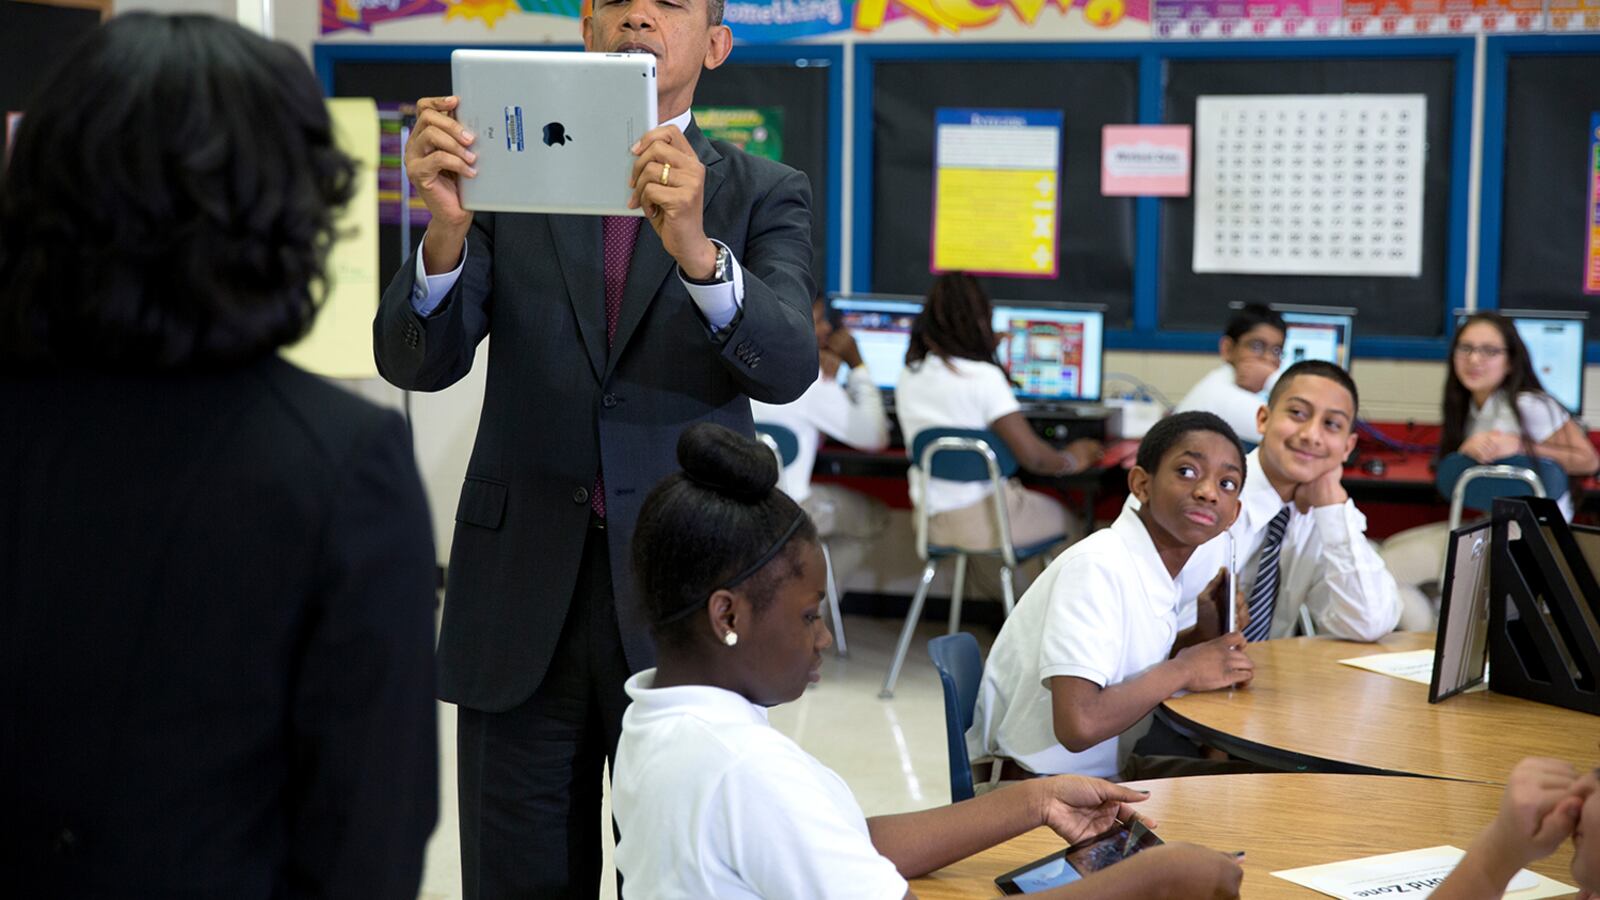 President Barack Obama using an iPad while visiting a classroom in Maryland in February.